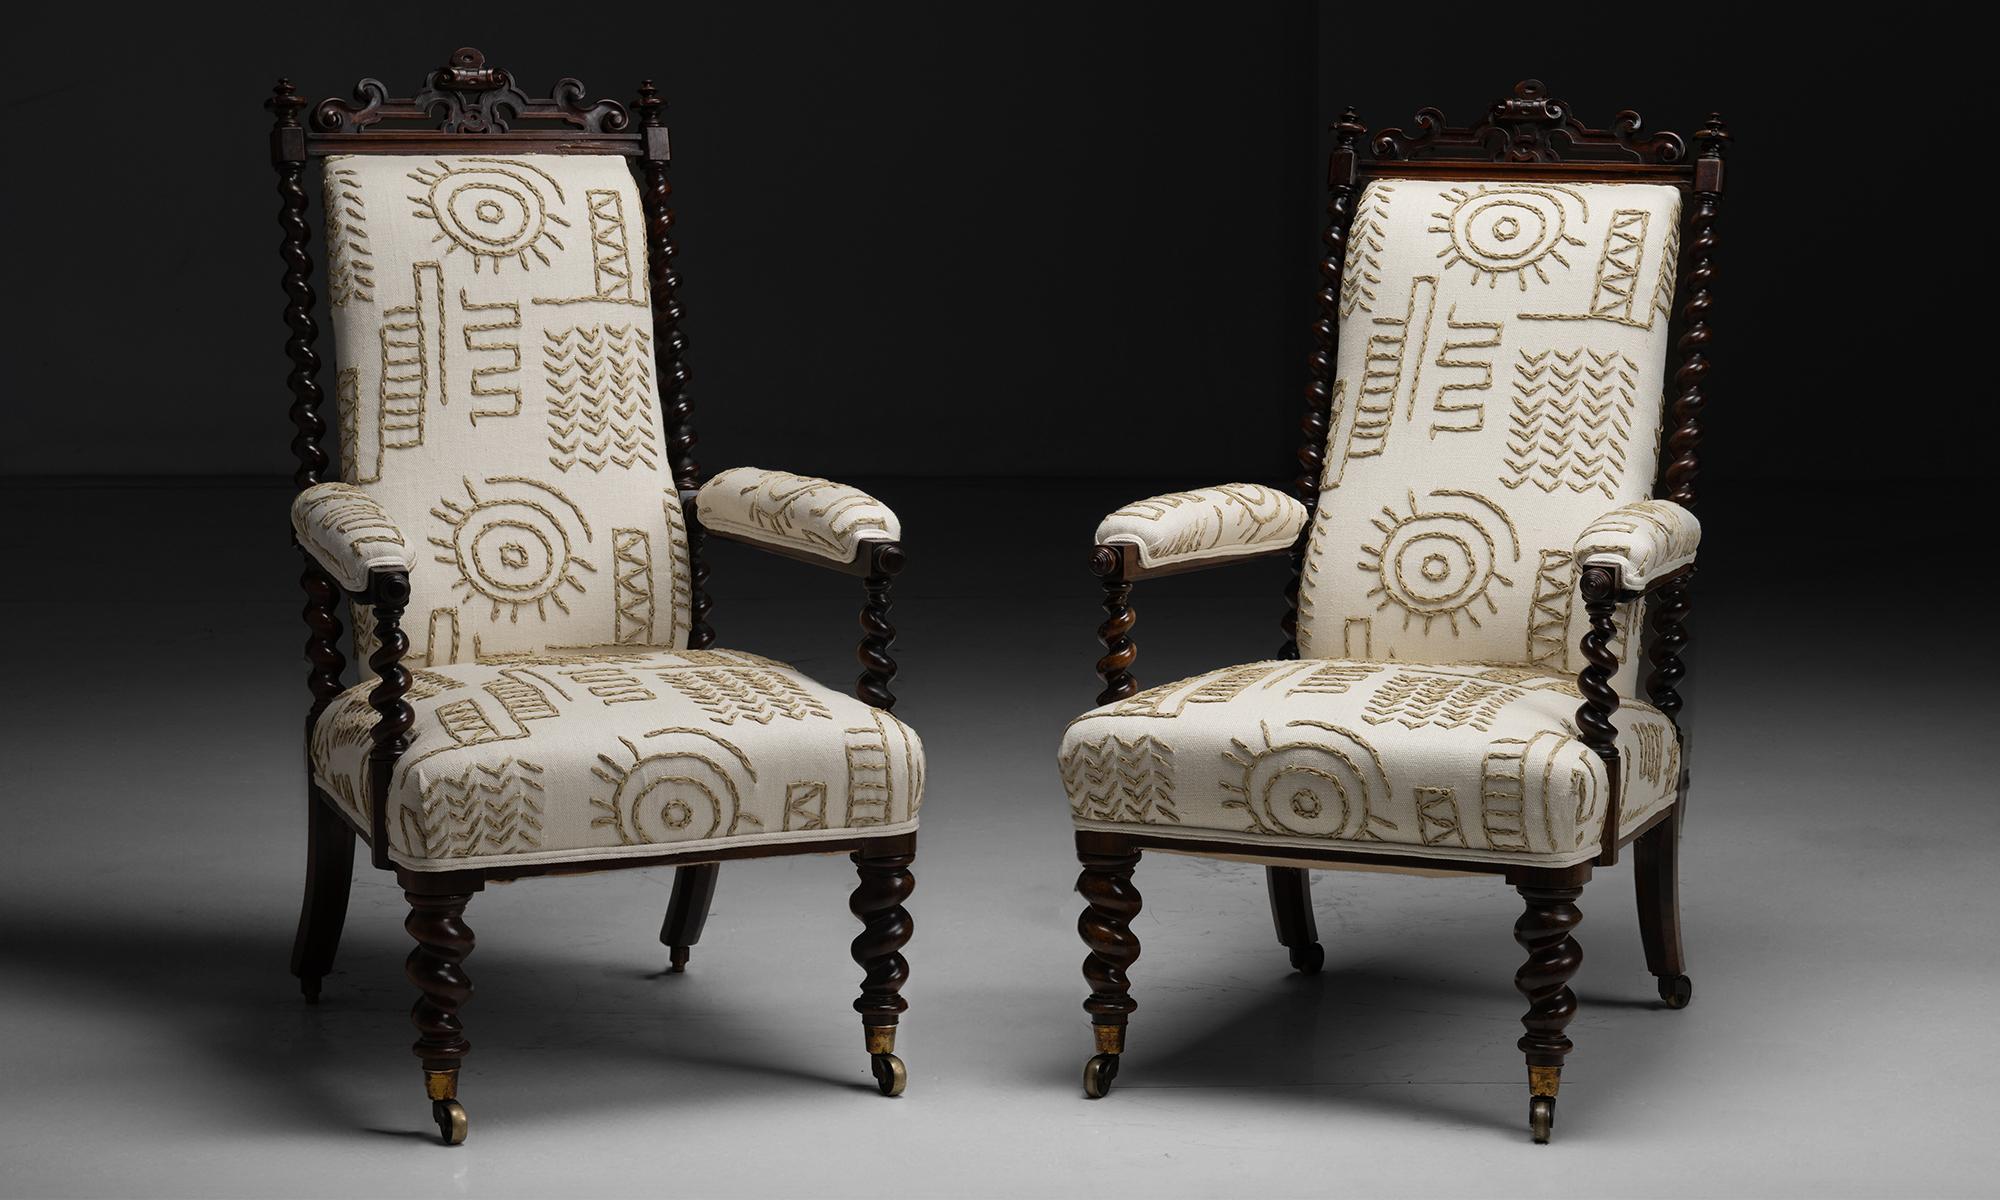 Armchairs by Miles & Edwards in Pierre Frey Embroidered Linen

England circa 1835

Newly upholstered in embroidered linen blend by Pierre Frey.

24.5